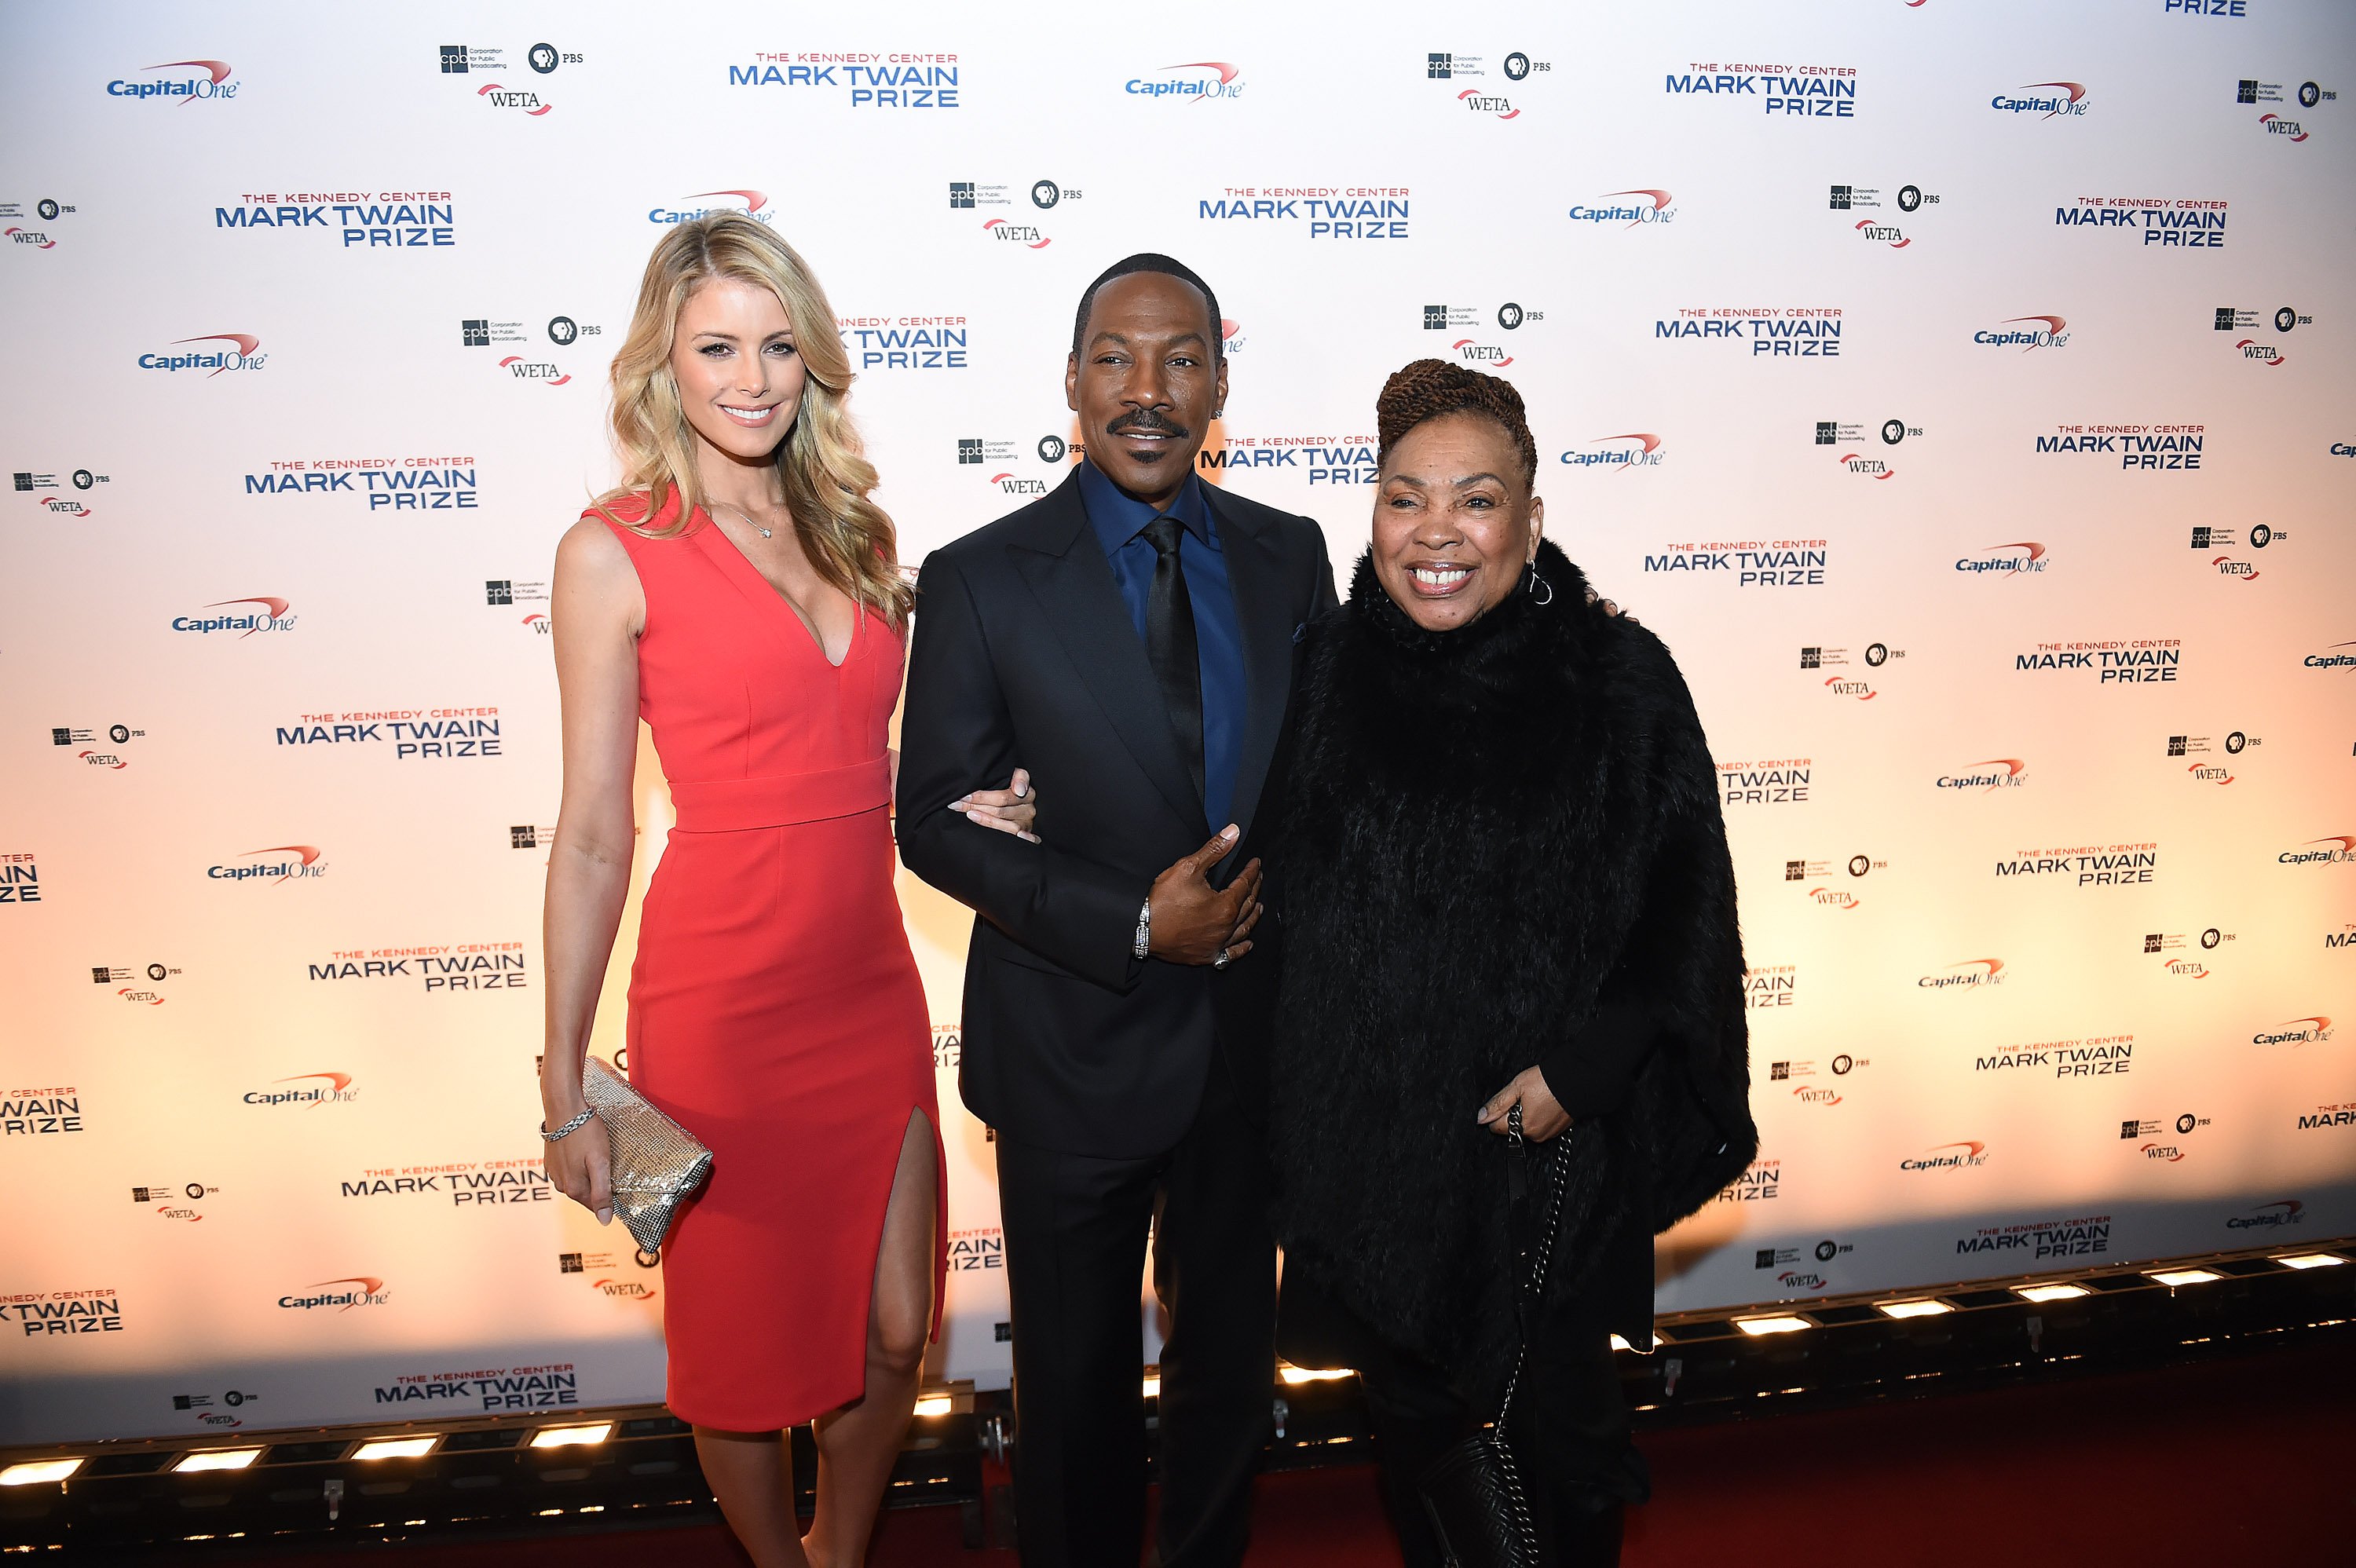  Paige Butcher, left, and Eddie Murphy, center, and Murphy's mother, Lillian Murphy, right are seen on the red carpet at the Kennedy Center for the Mark Twain Prize for American Humor ceremony that honored Murphy on Sunday October 18, 2015 in Washington, DC | Source: Getty Images